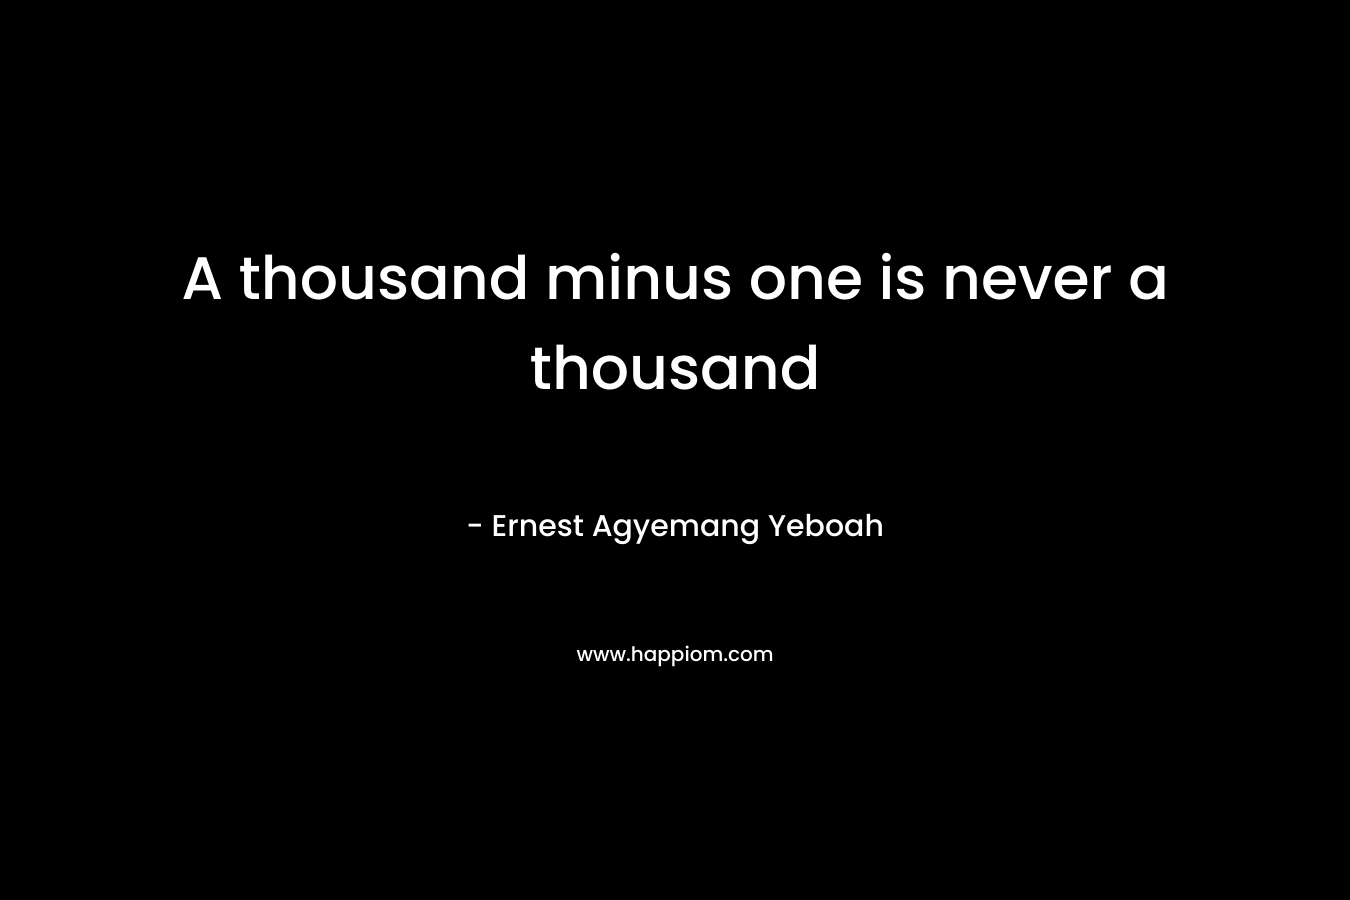 A thousand minus one is never a thousand